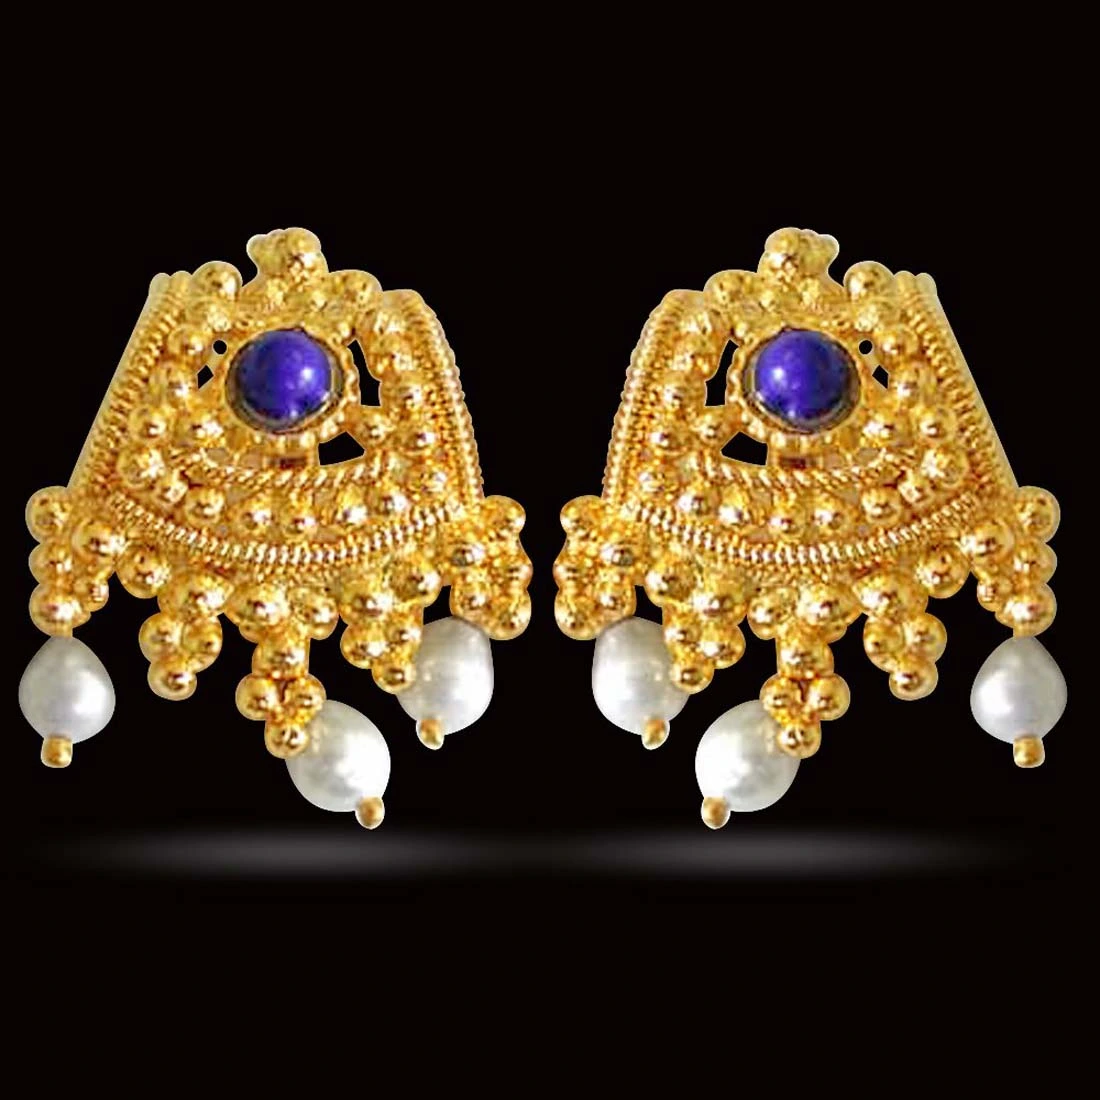 Classic Ethnic - Temple Design Freshwater Pearl, Blue Lapiz & Gold Plated Earrings for Women (SE51A)